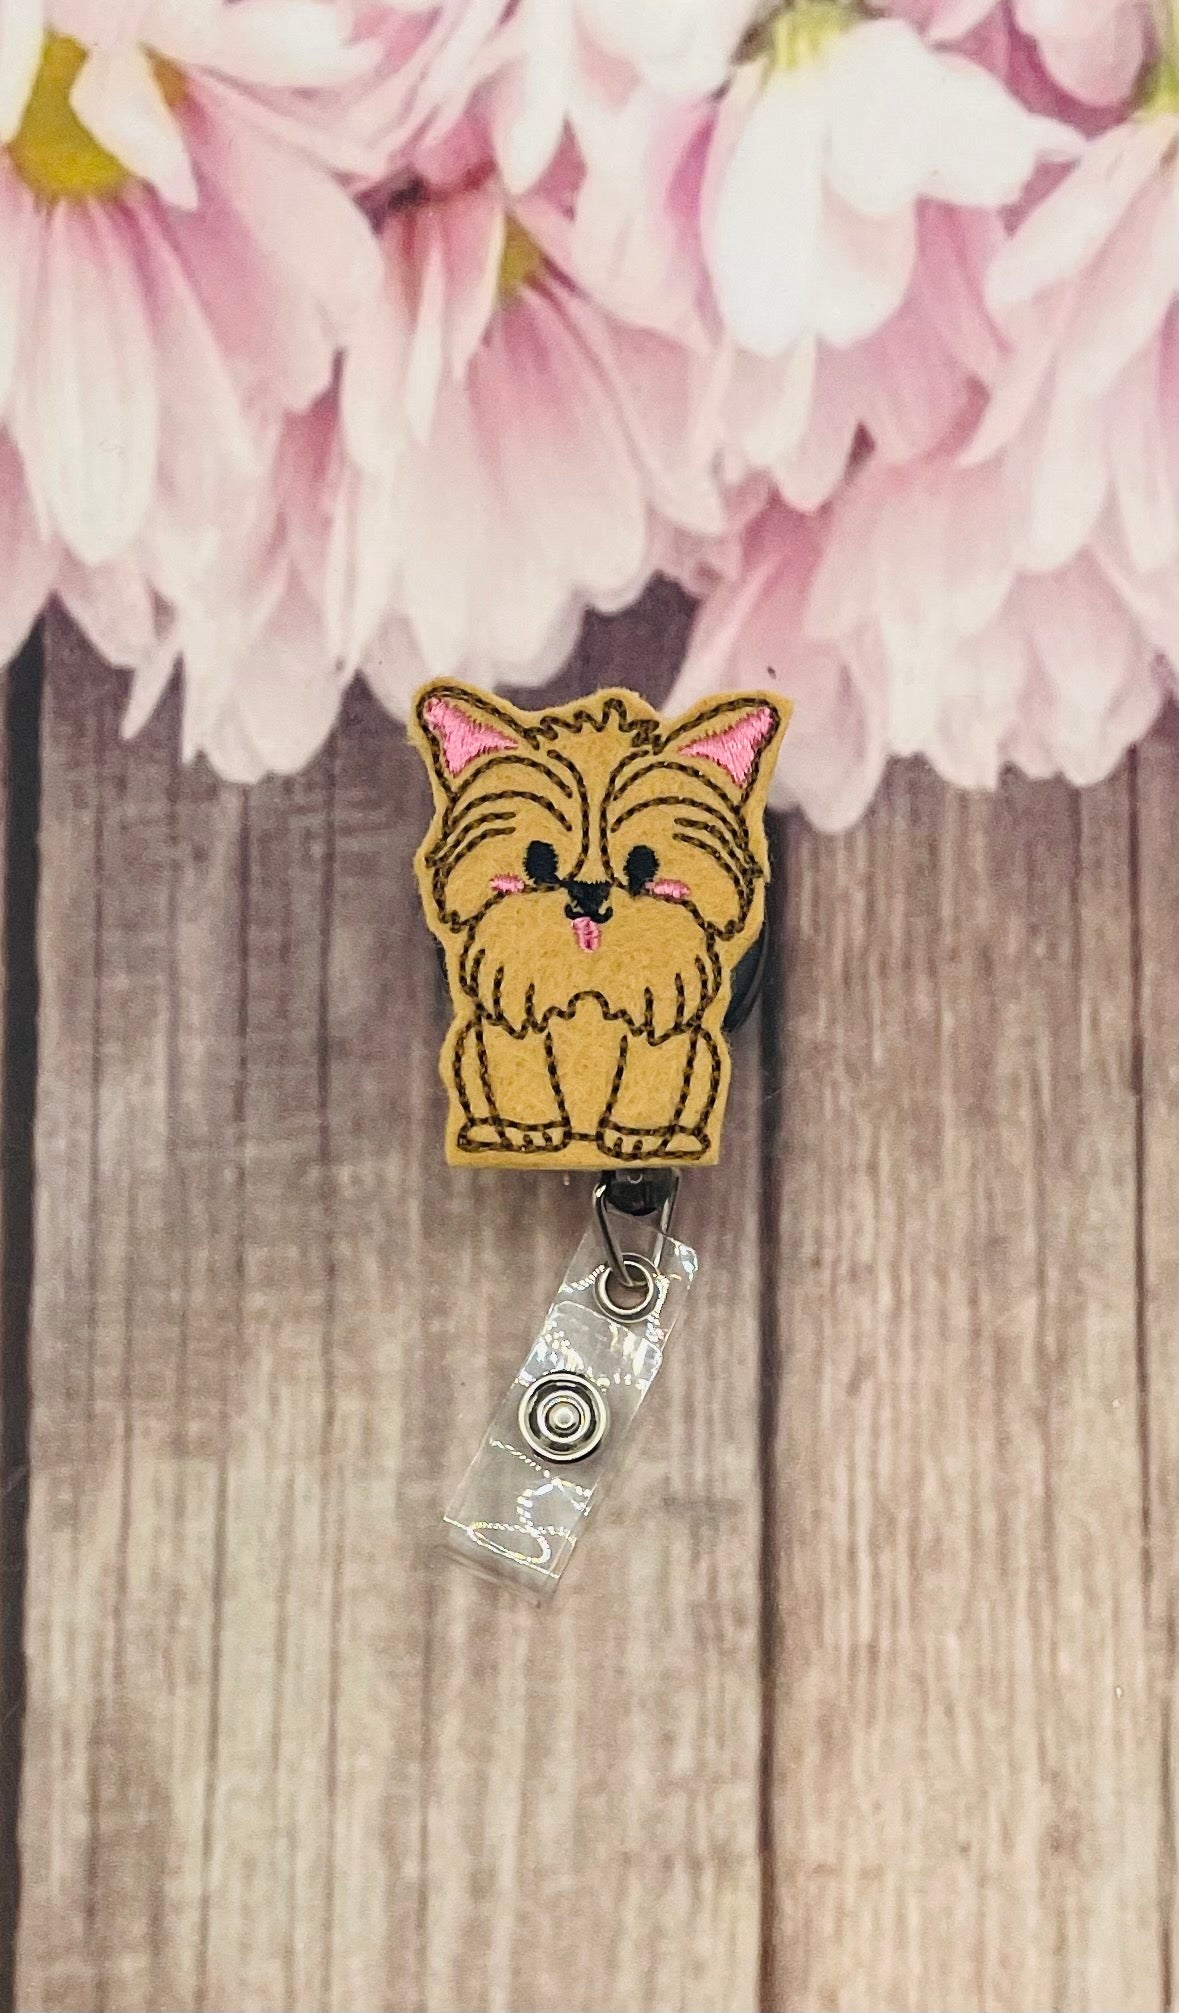 I Left My Cat / Cats for This Retractable Badge Holder Funny Cat